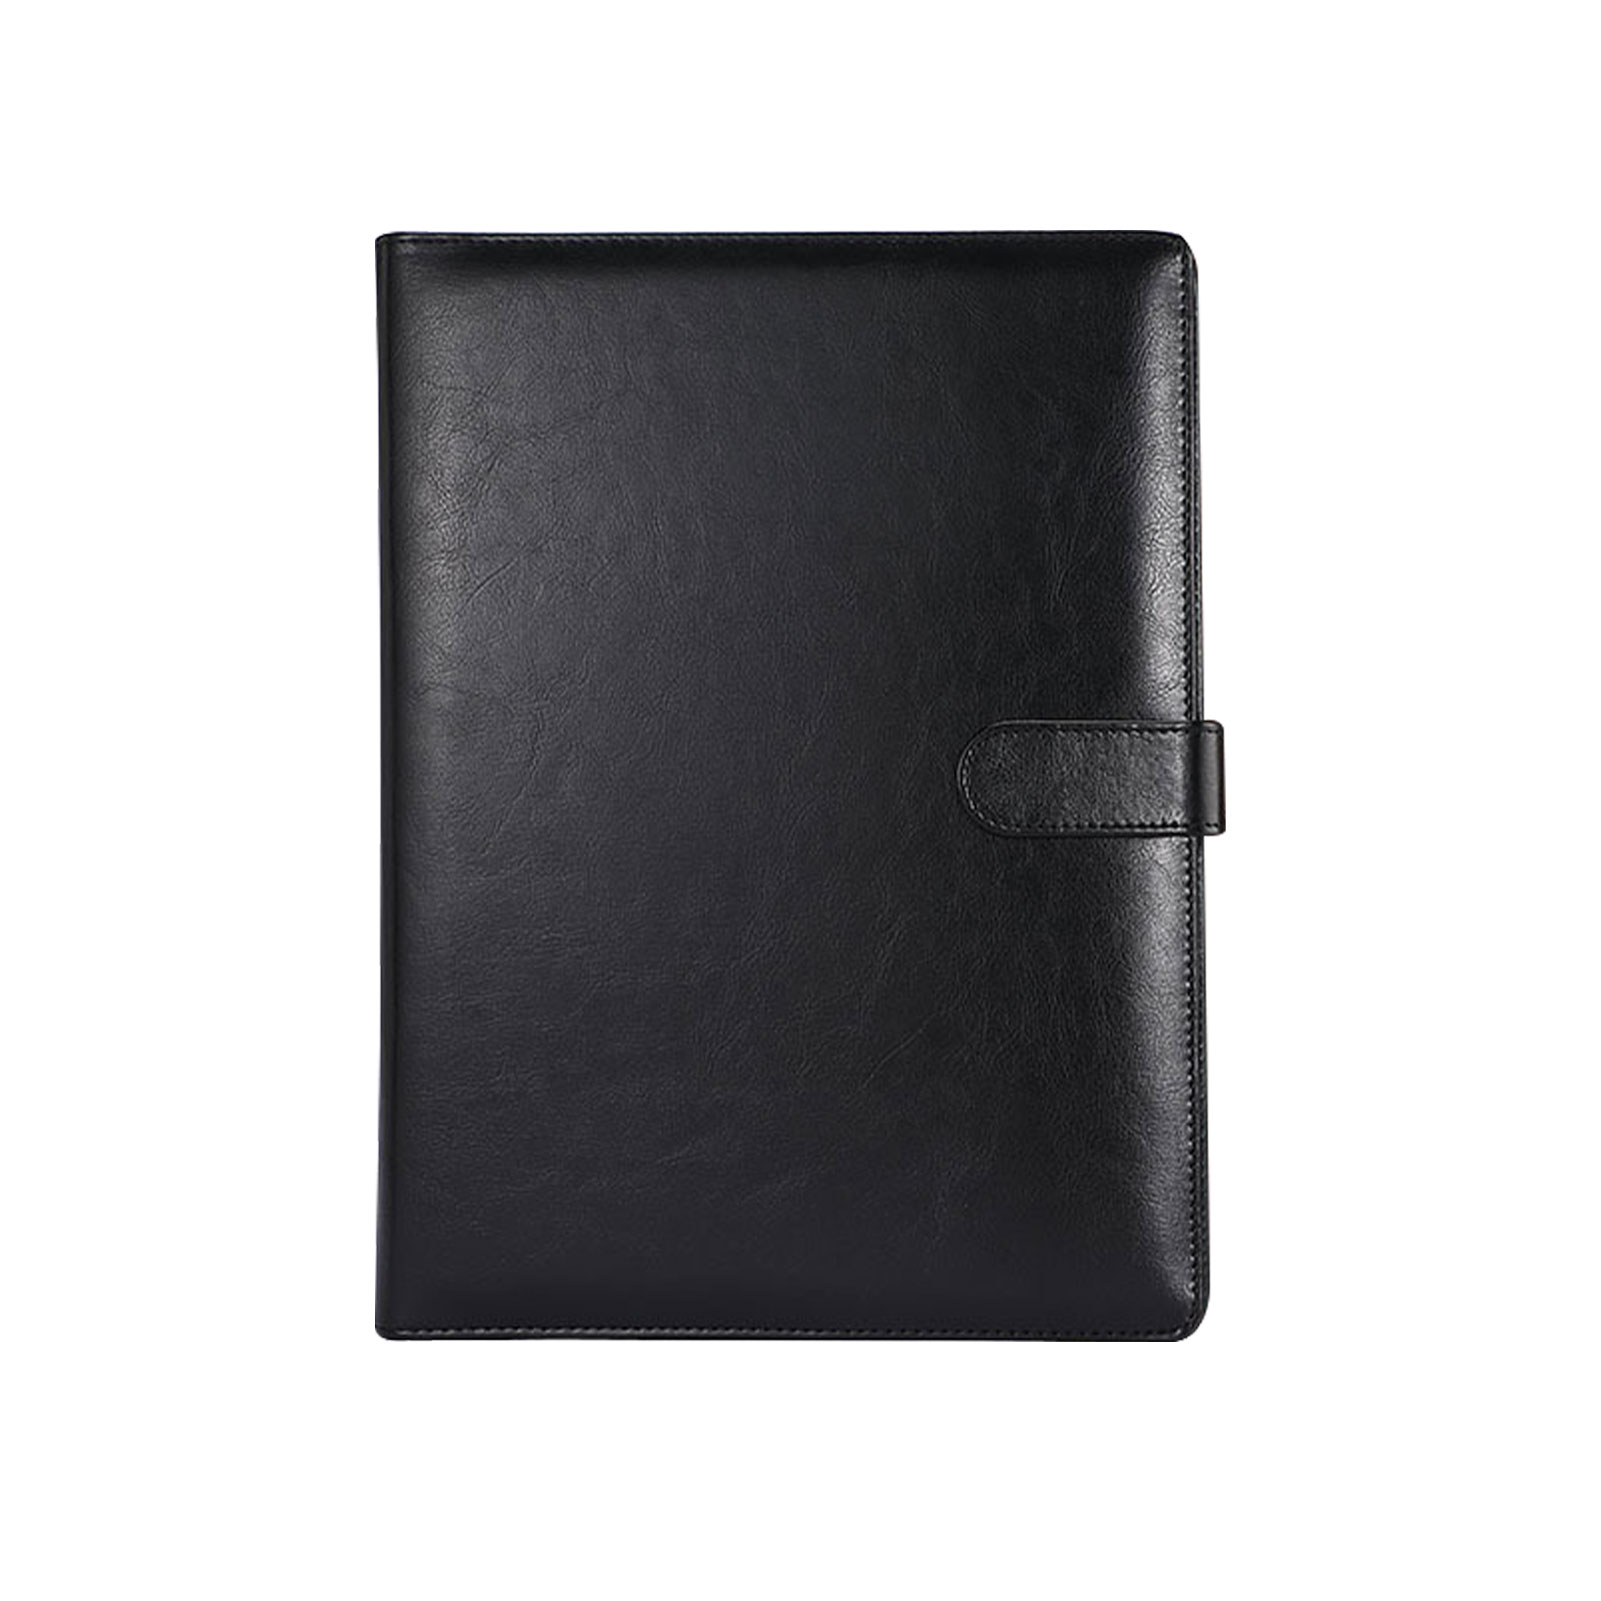 Meeting Card Holder Business For Document Practical Portable Adults Magnetic Buckle Clip PU Leather Durable Padfolio Organizer